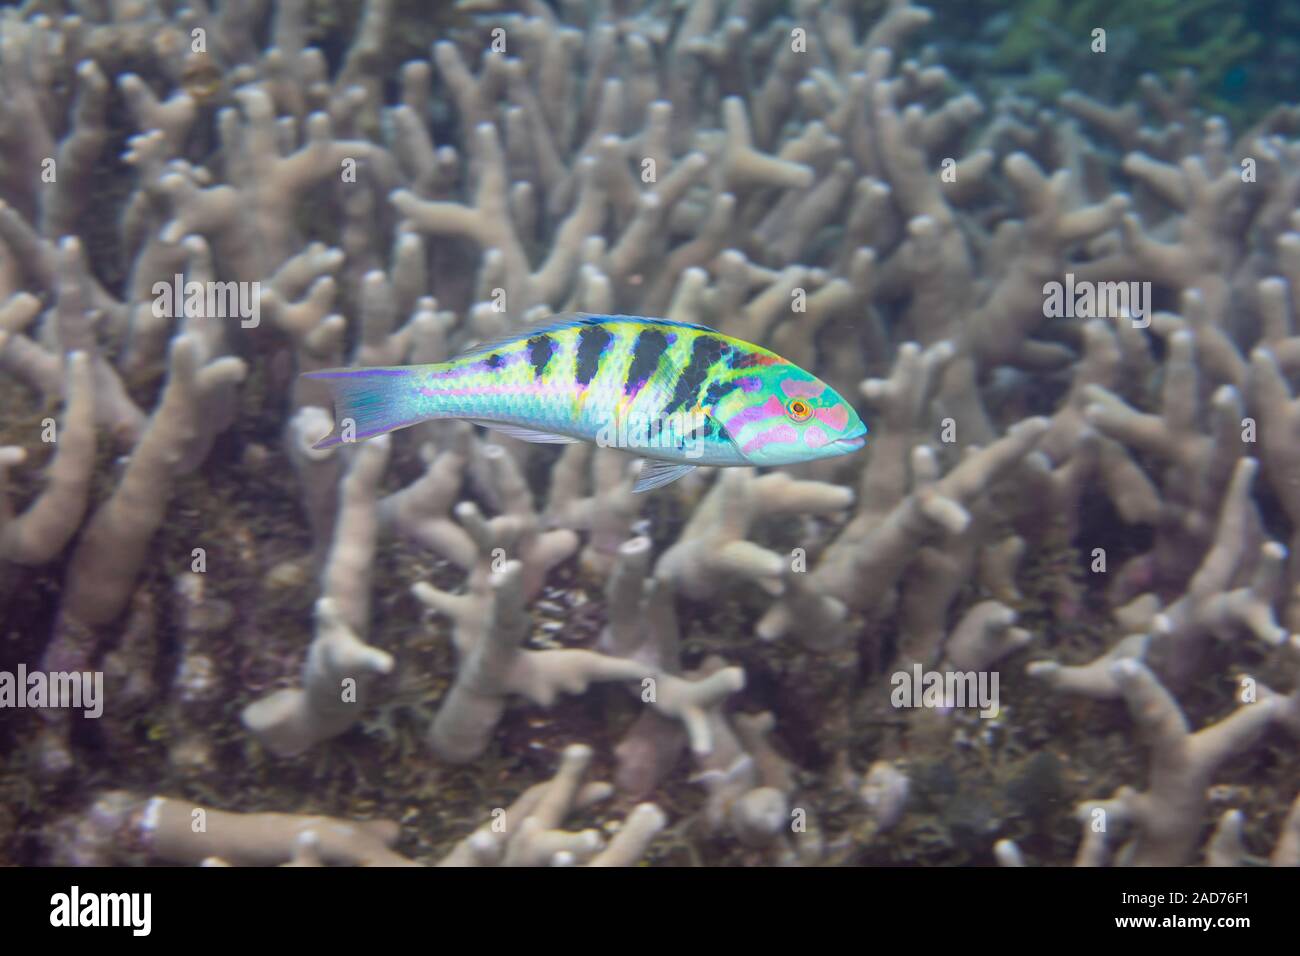 An adult sixbar wrasse, Thalassoma hardwicke, reaches 8 inches in length, Yap, Micronesia. Stock Photo